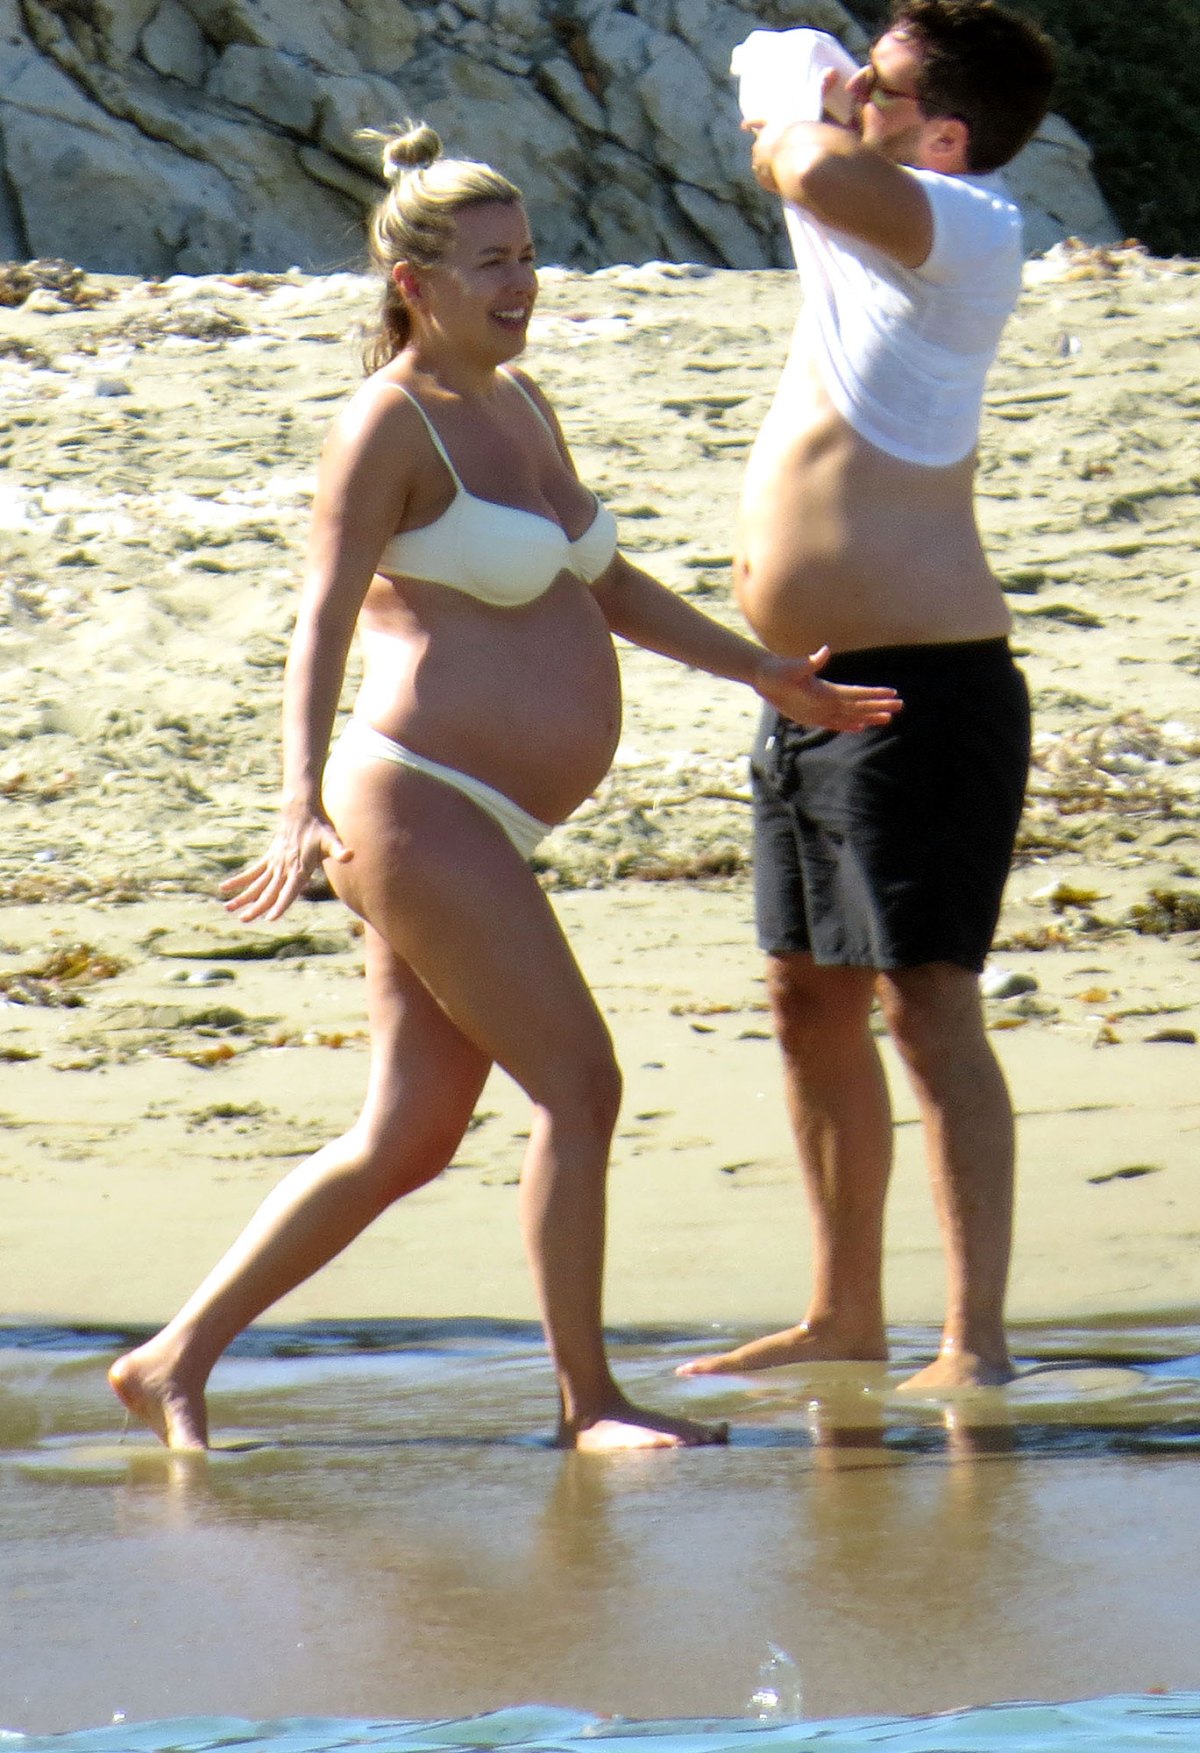 Pregnant Katy Perry Shows Baby Bump at Beach With Friends: Pics